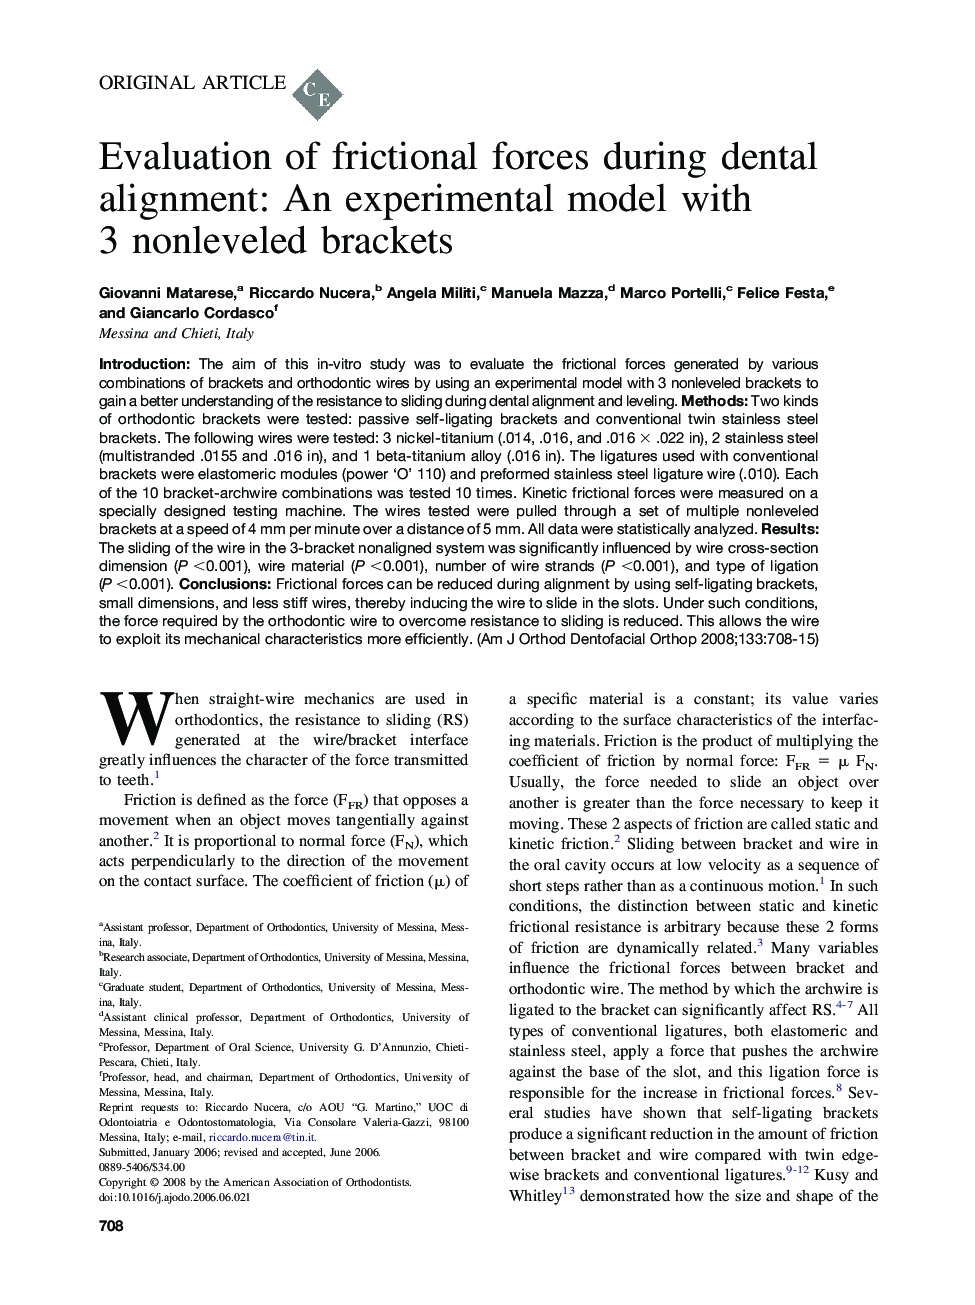 Evaluation of frictional forces during dental alignment: An experimental model with 3 nonleveled brackets